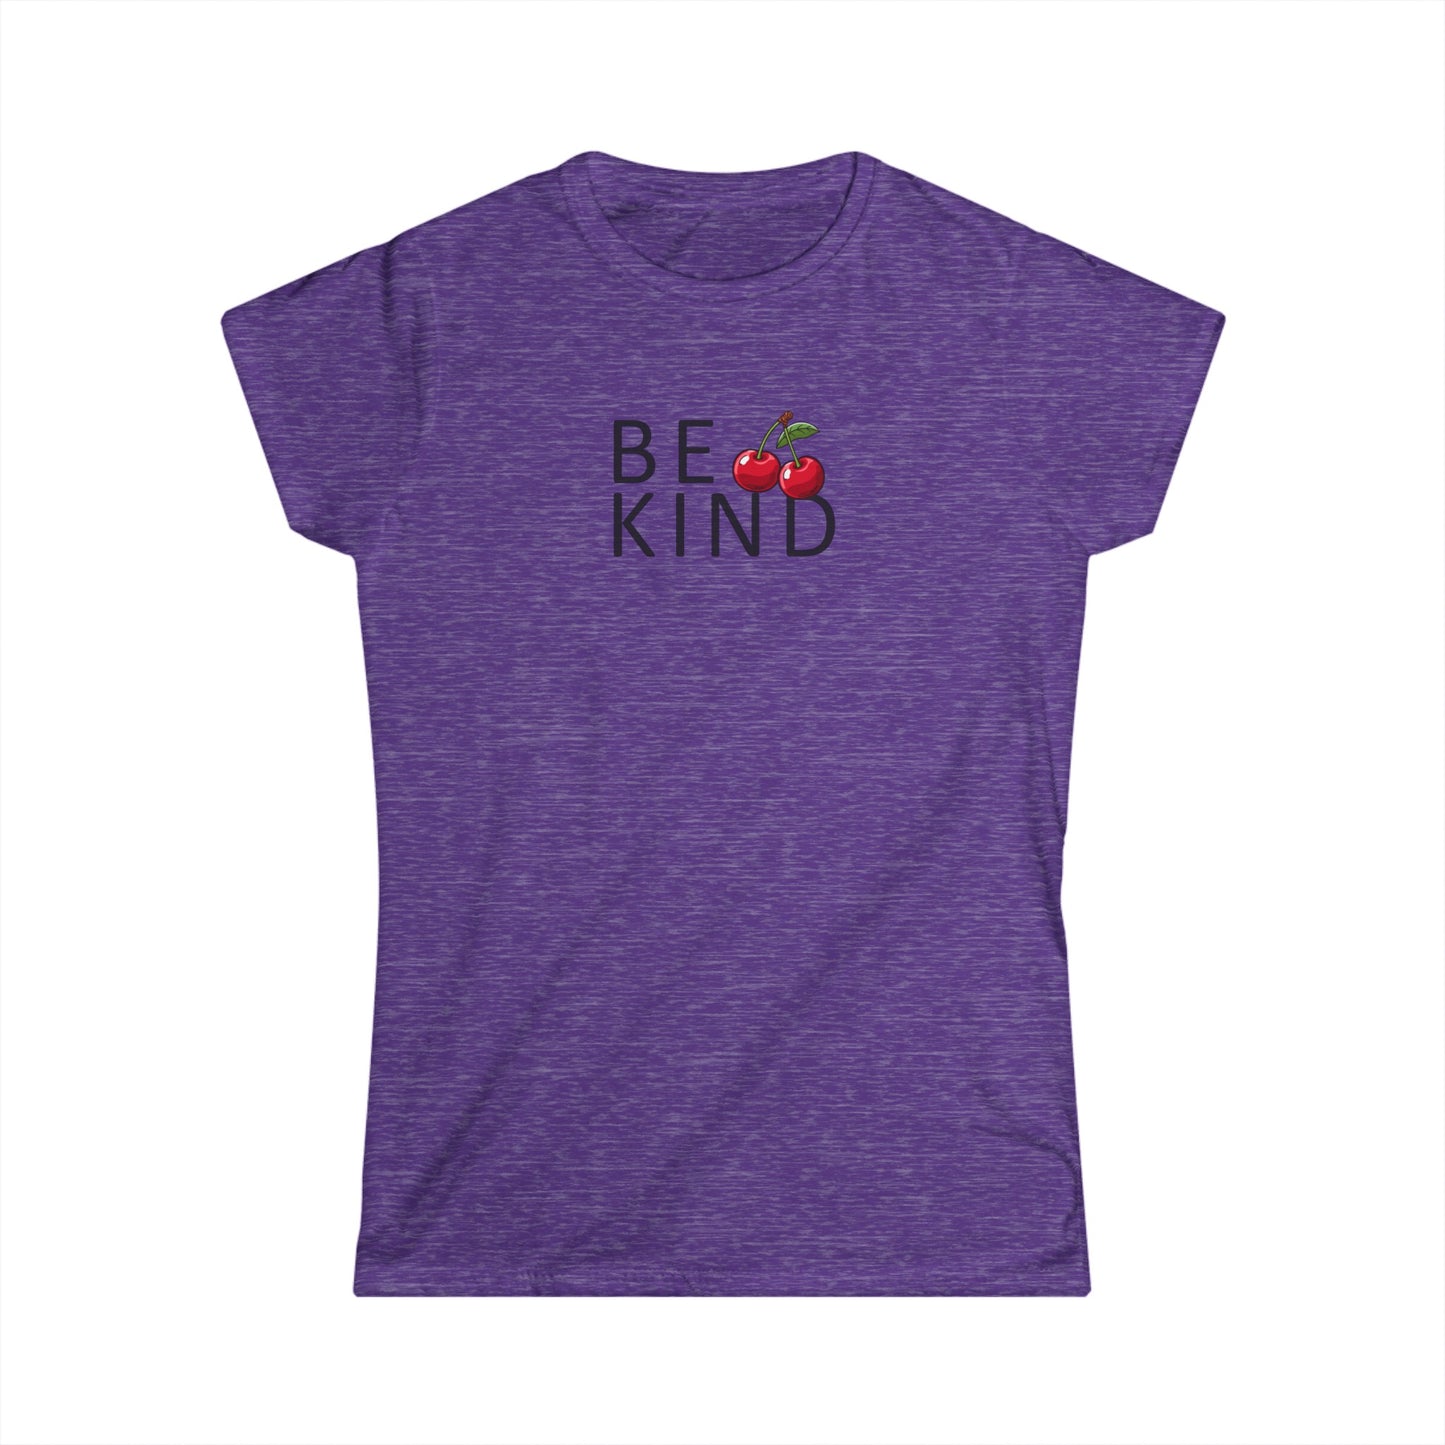 "Be Kind" Women's Softstyle Tee